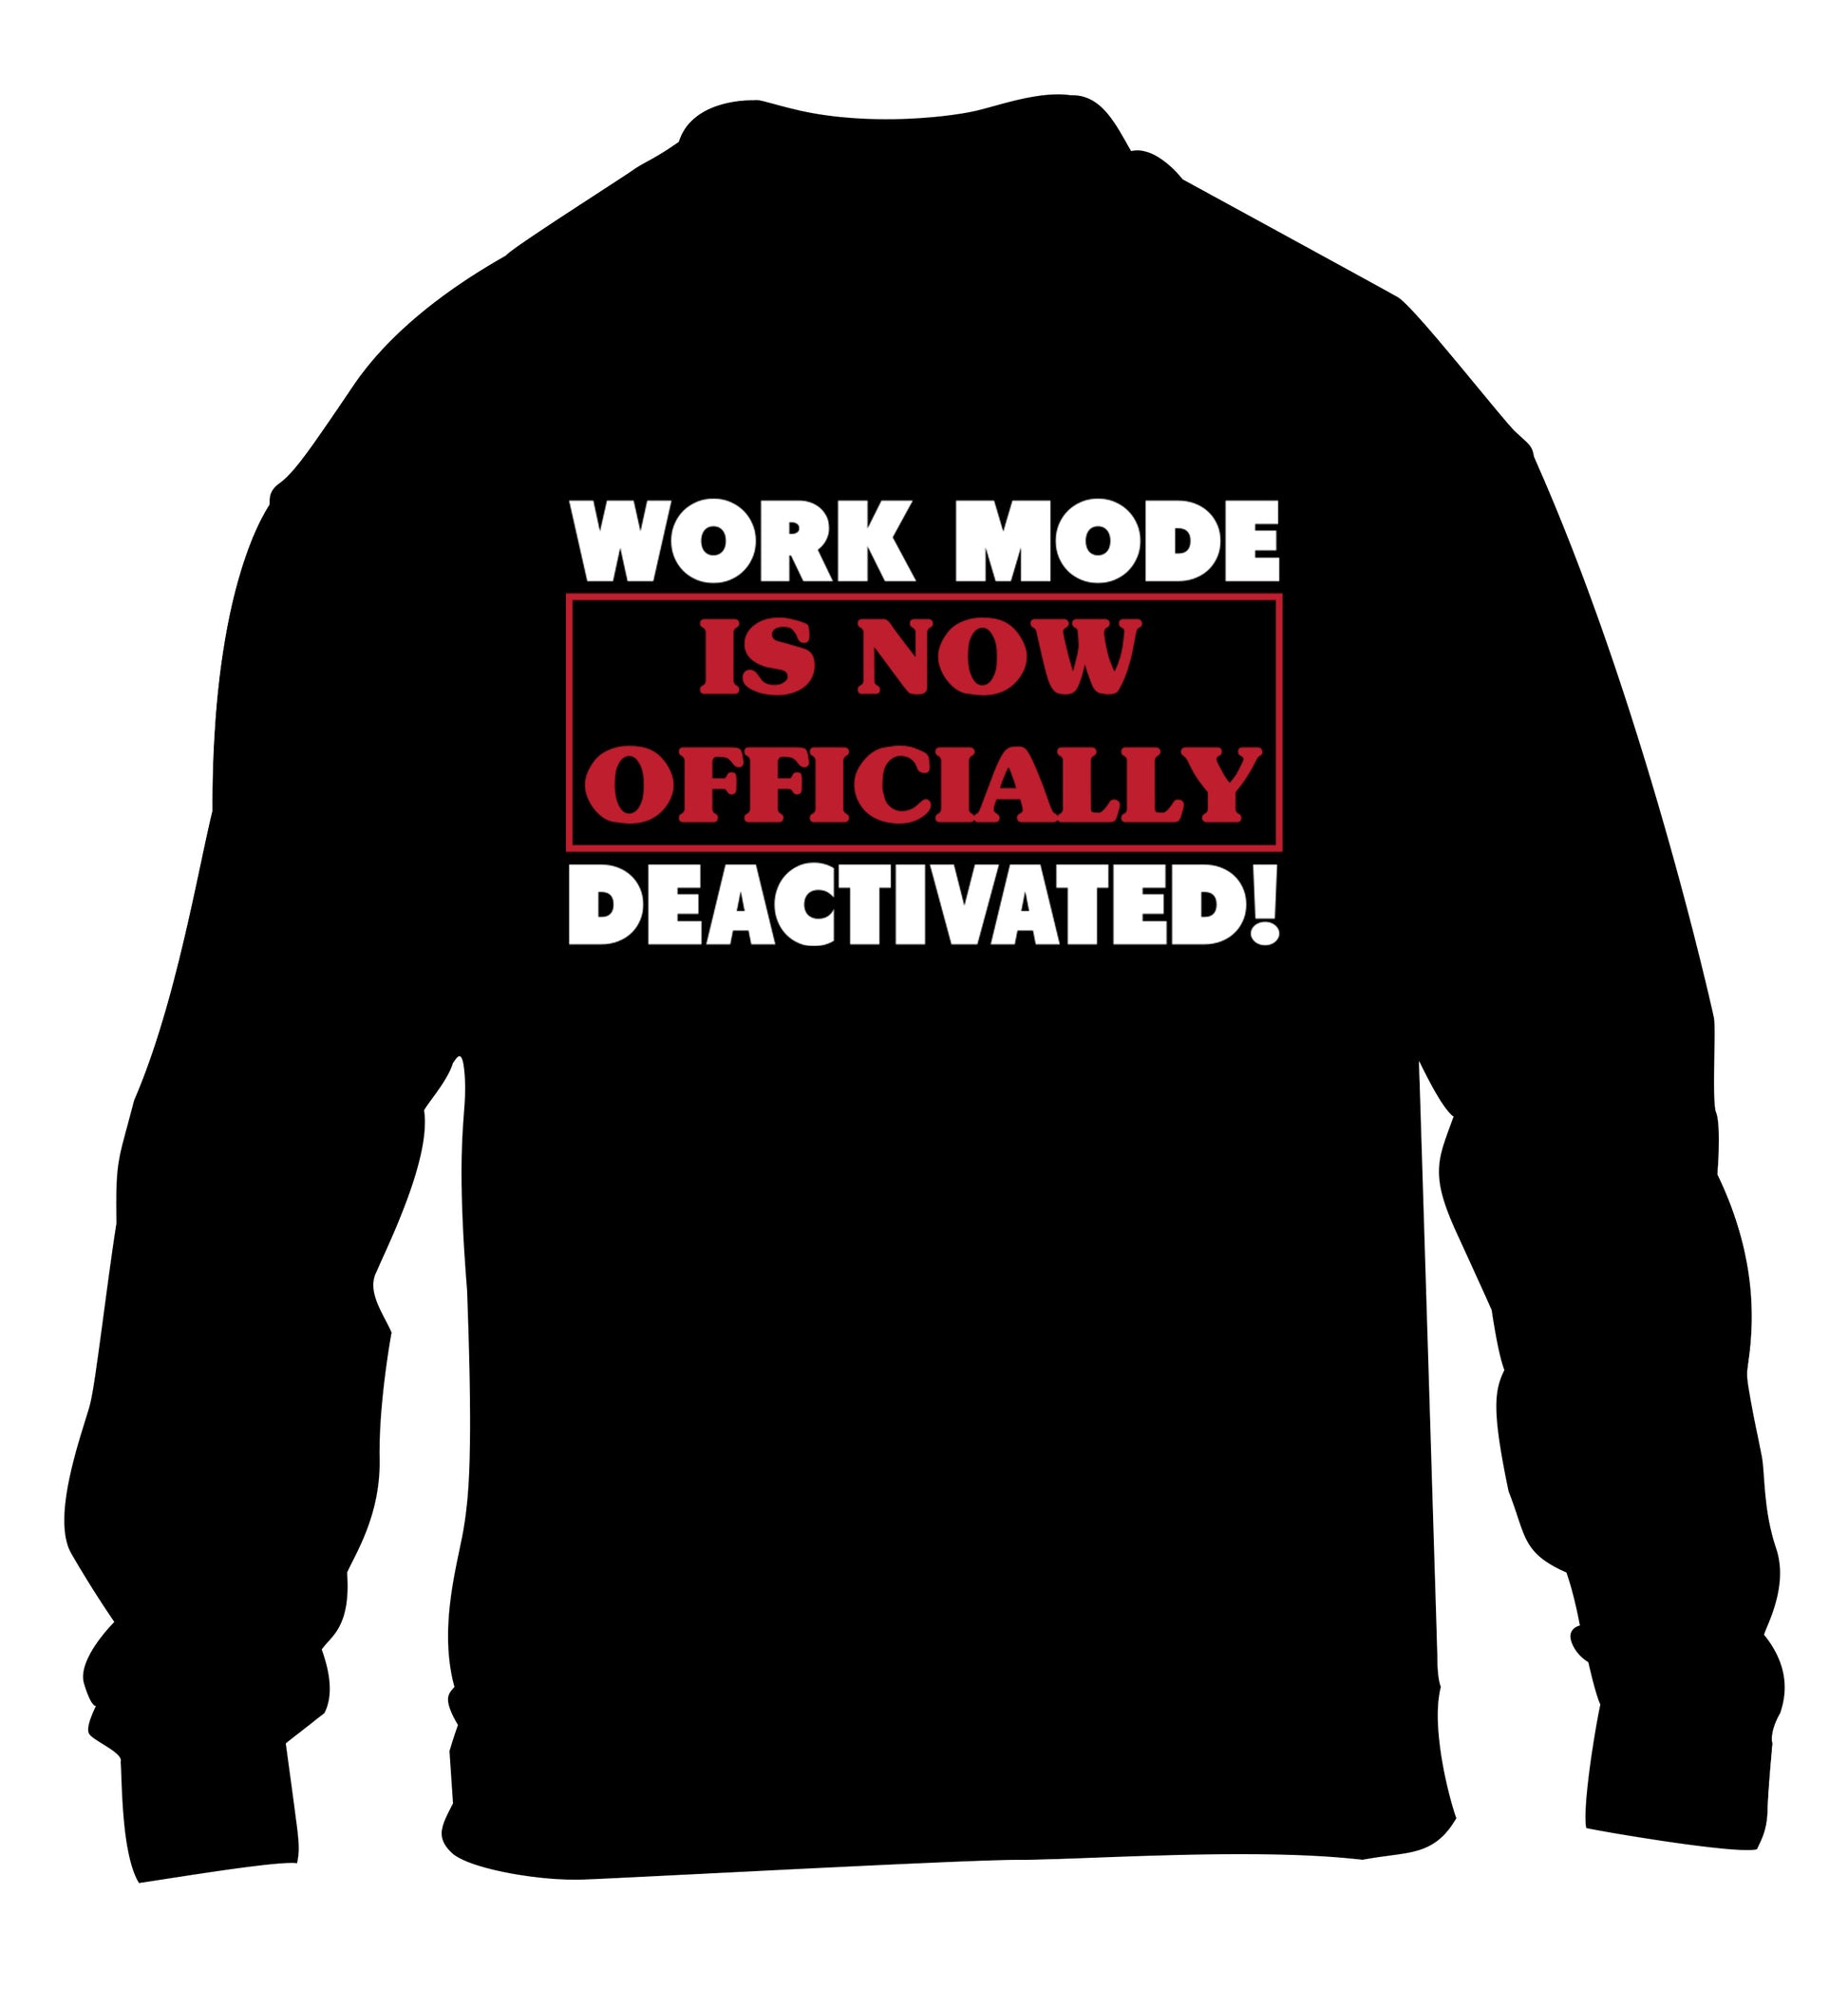 Work mode is now officially deactivated children's black sweater 12-13 Years